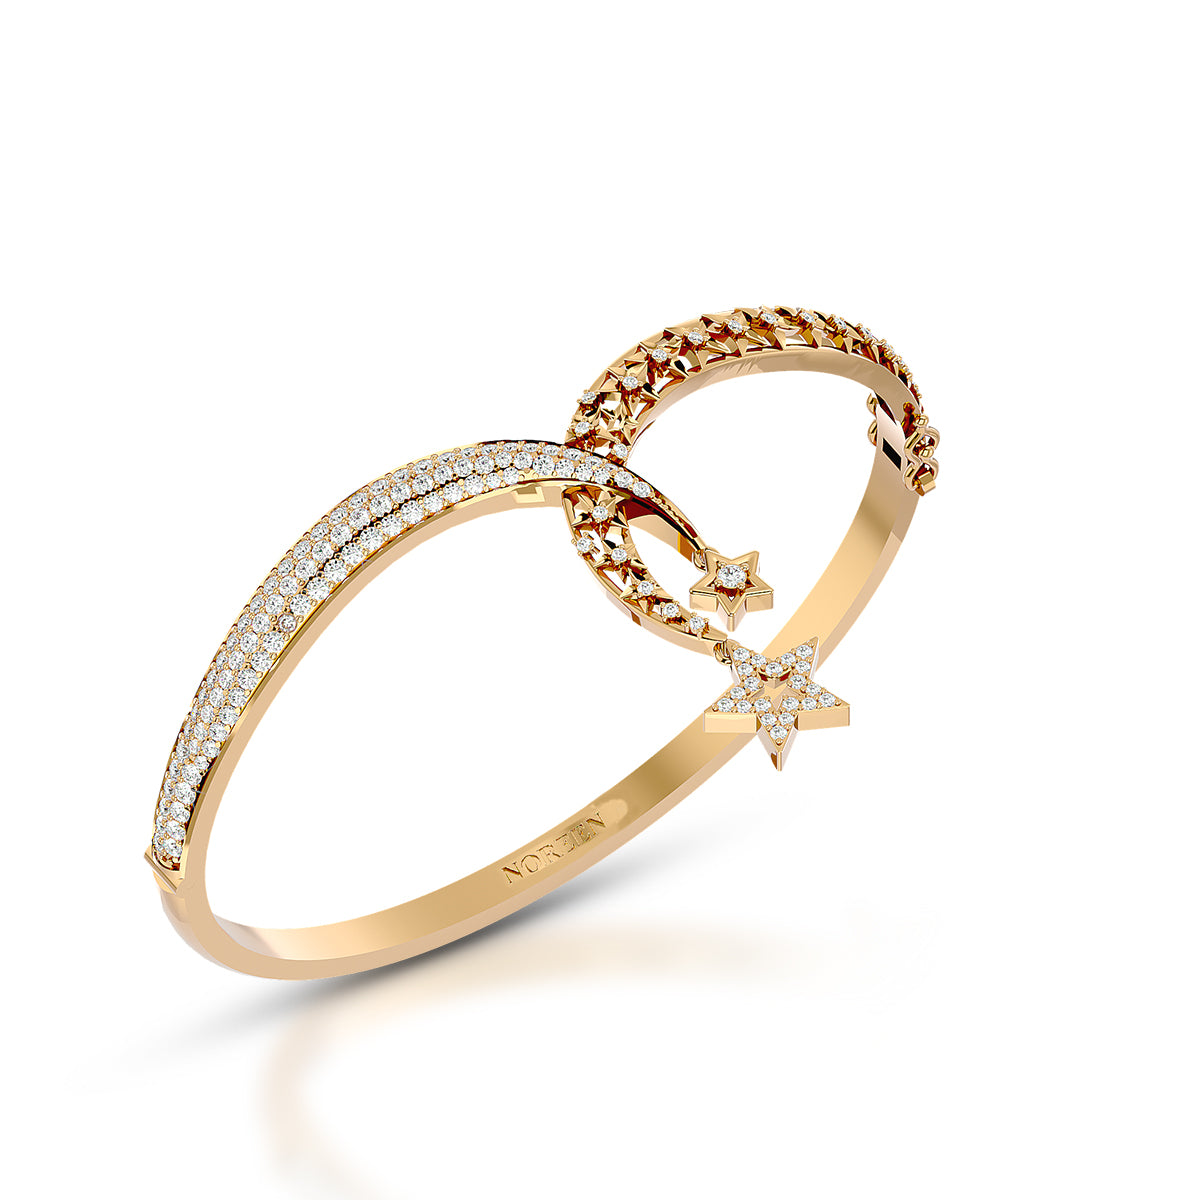 Connection Hinged Bangle Gold With Diamonds